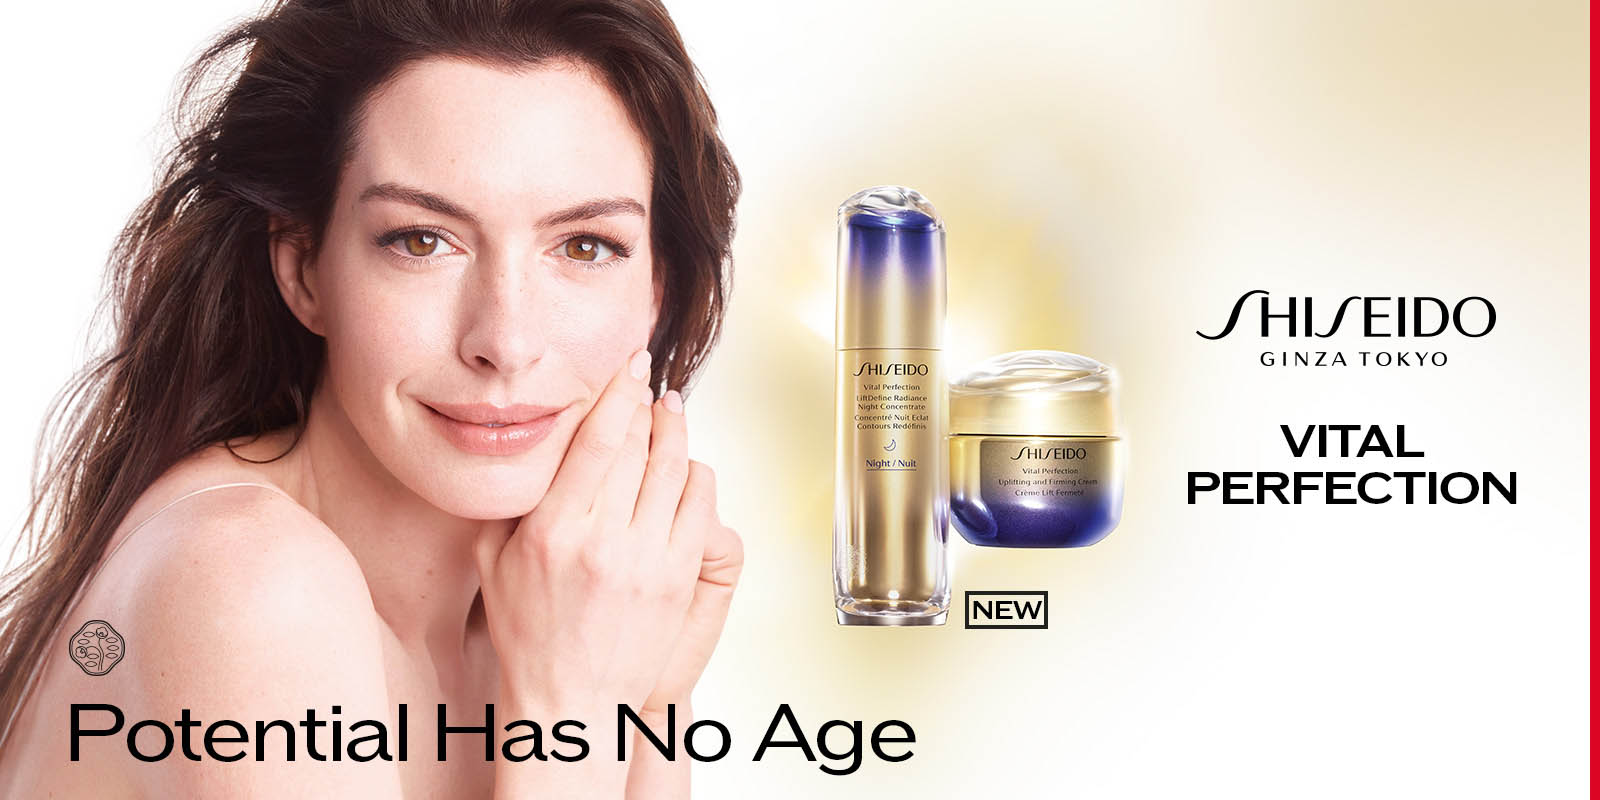 Shiseido Vital Perfection Lift Define Radiance Night Concentrate.